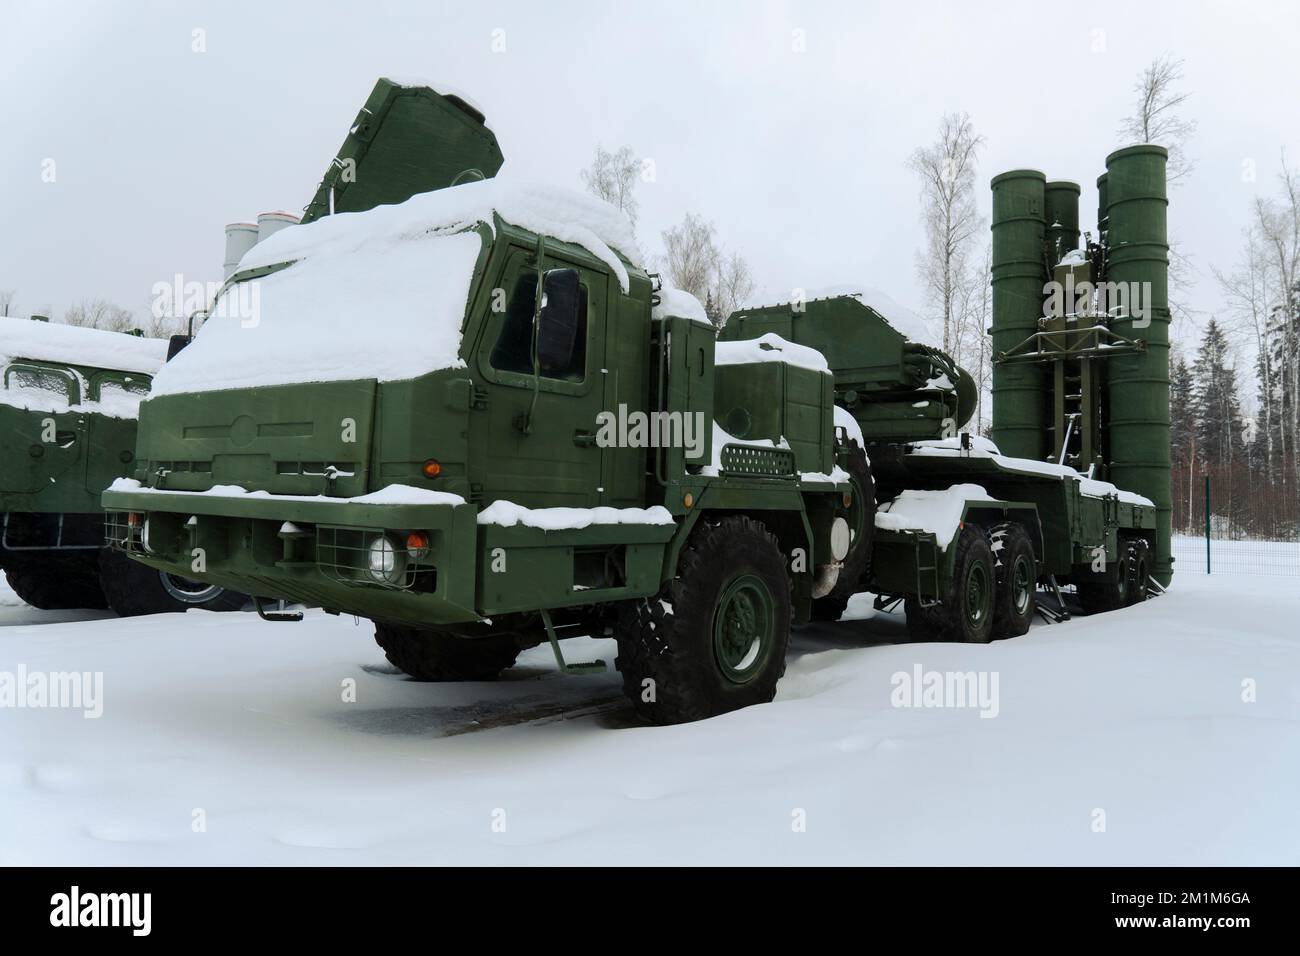 anti-aircraft missile system. Russian armed forces. Heavy Russian military equipment at a military base in the forest. preparation for rocket launch i Stock Photo